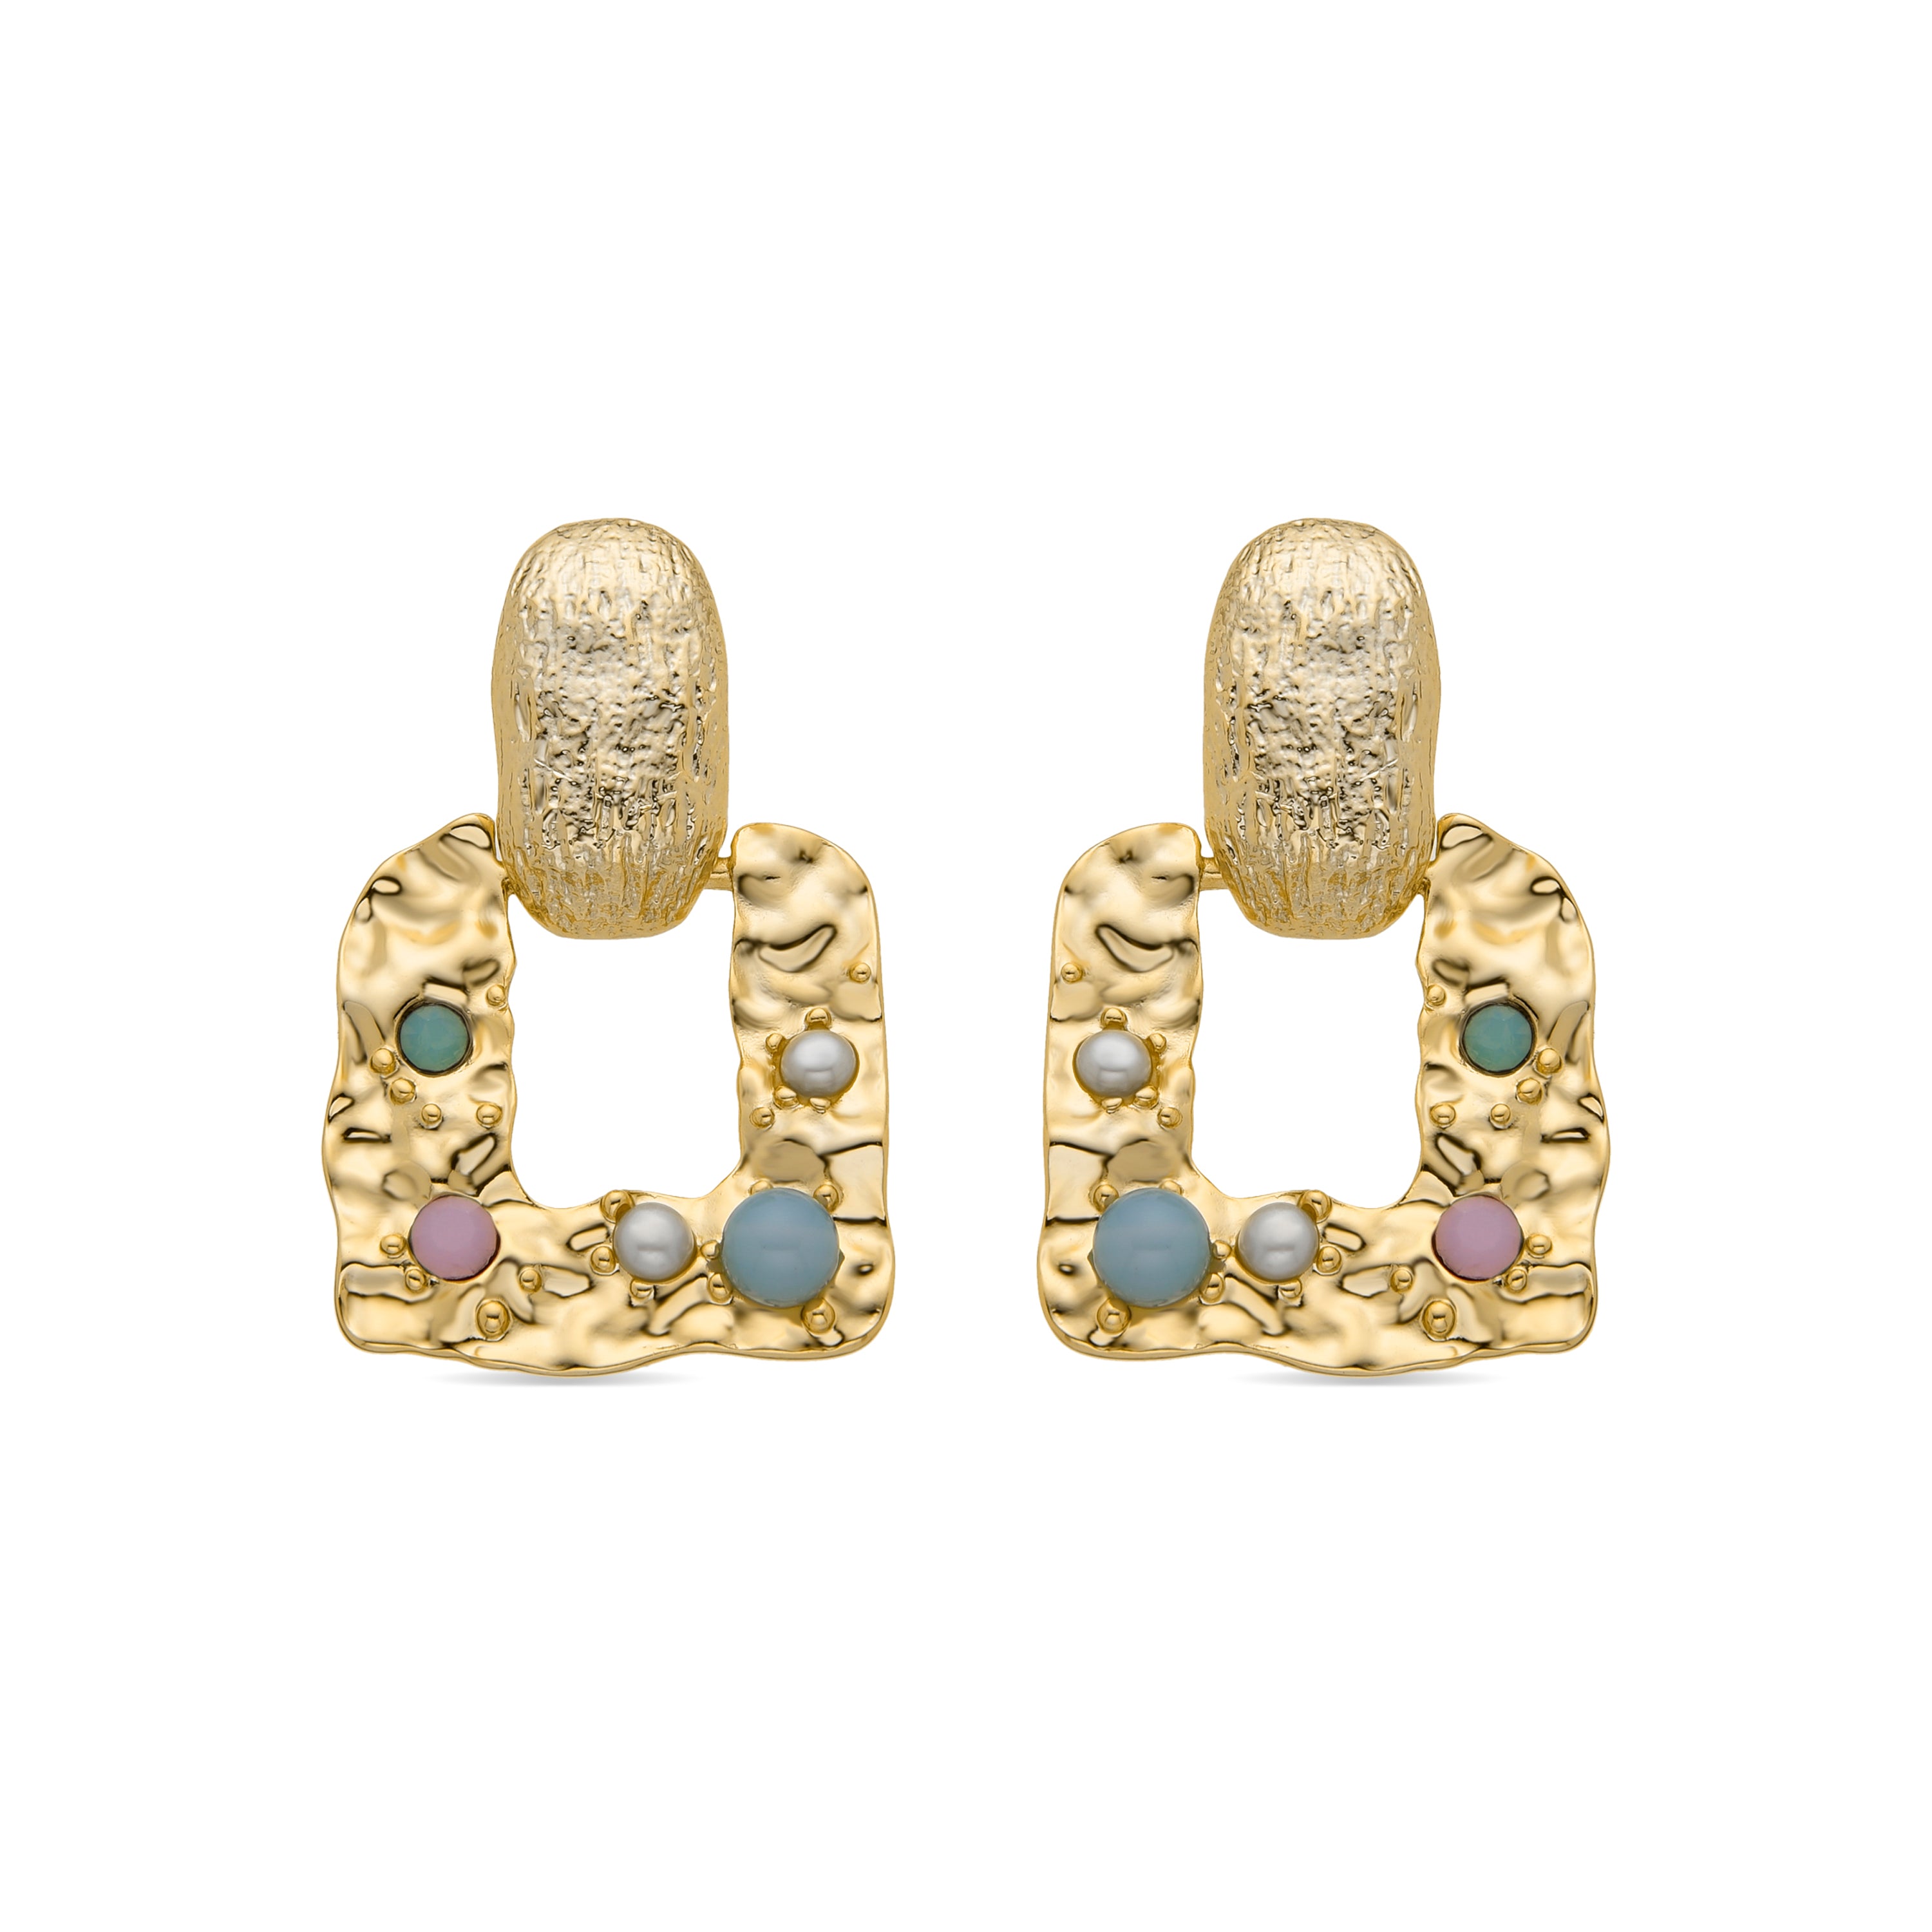 Paile earrings finished in 18k yellow gold